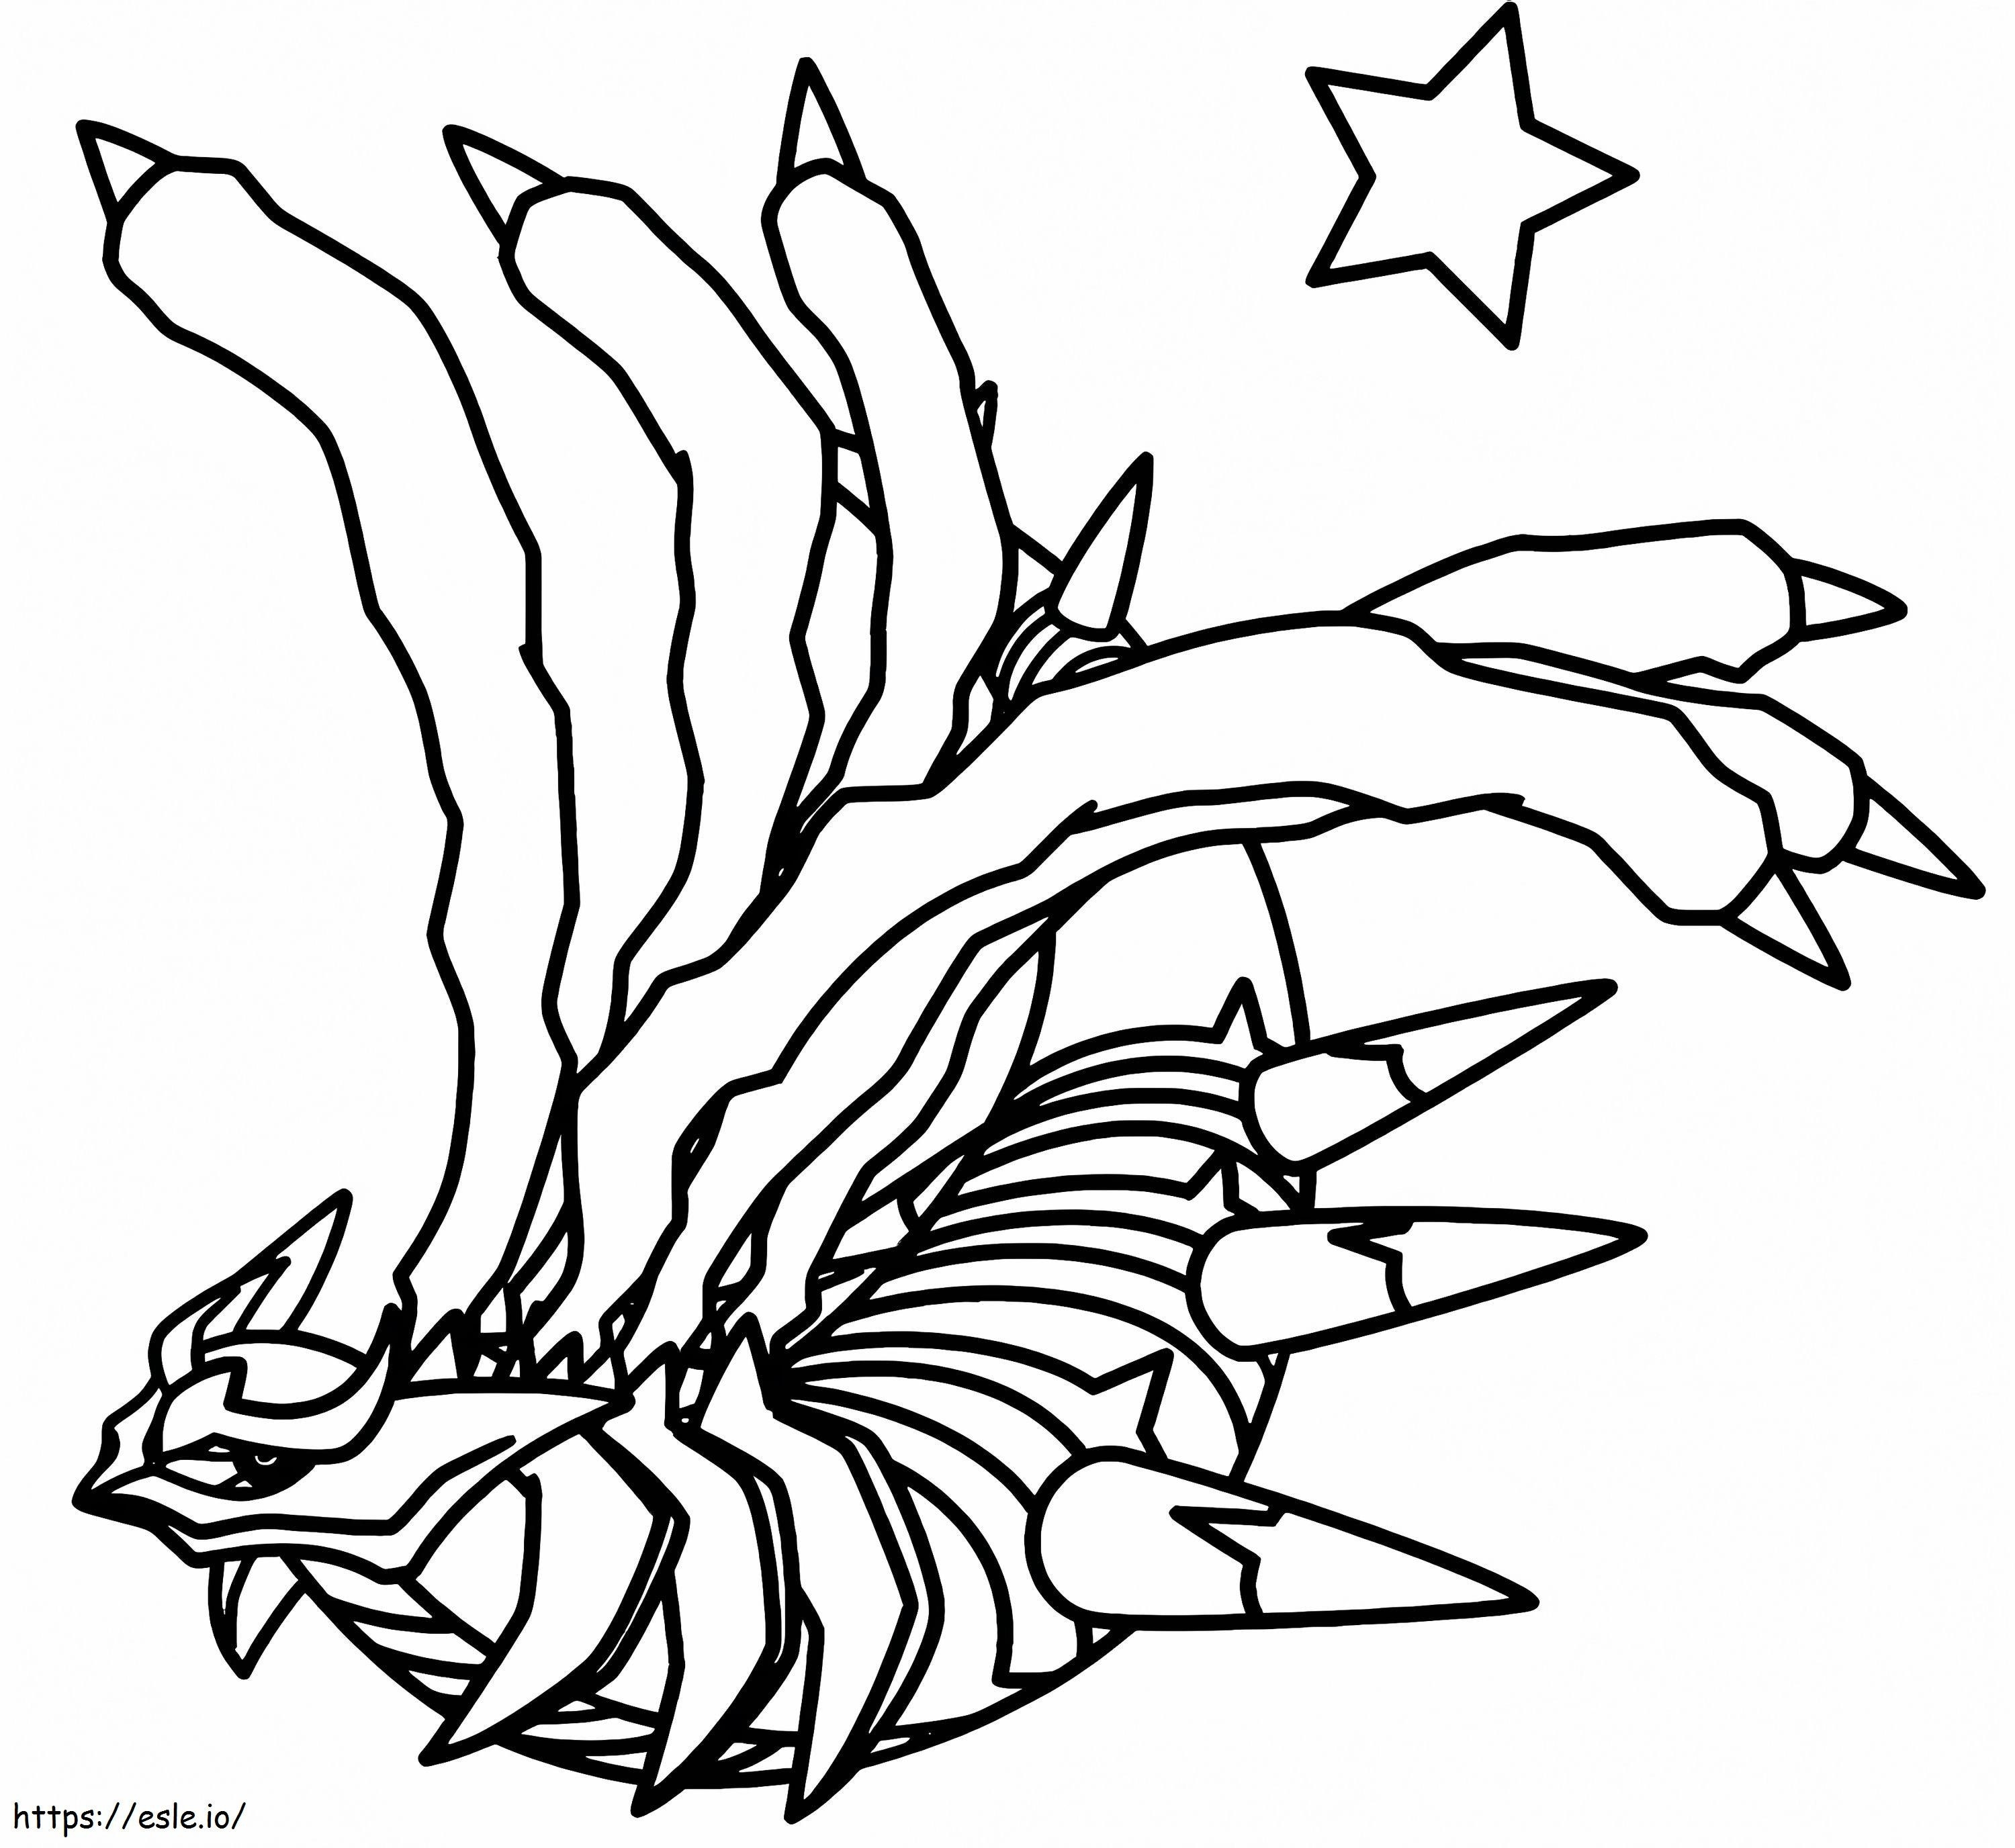 Awesome Giratina coloring page